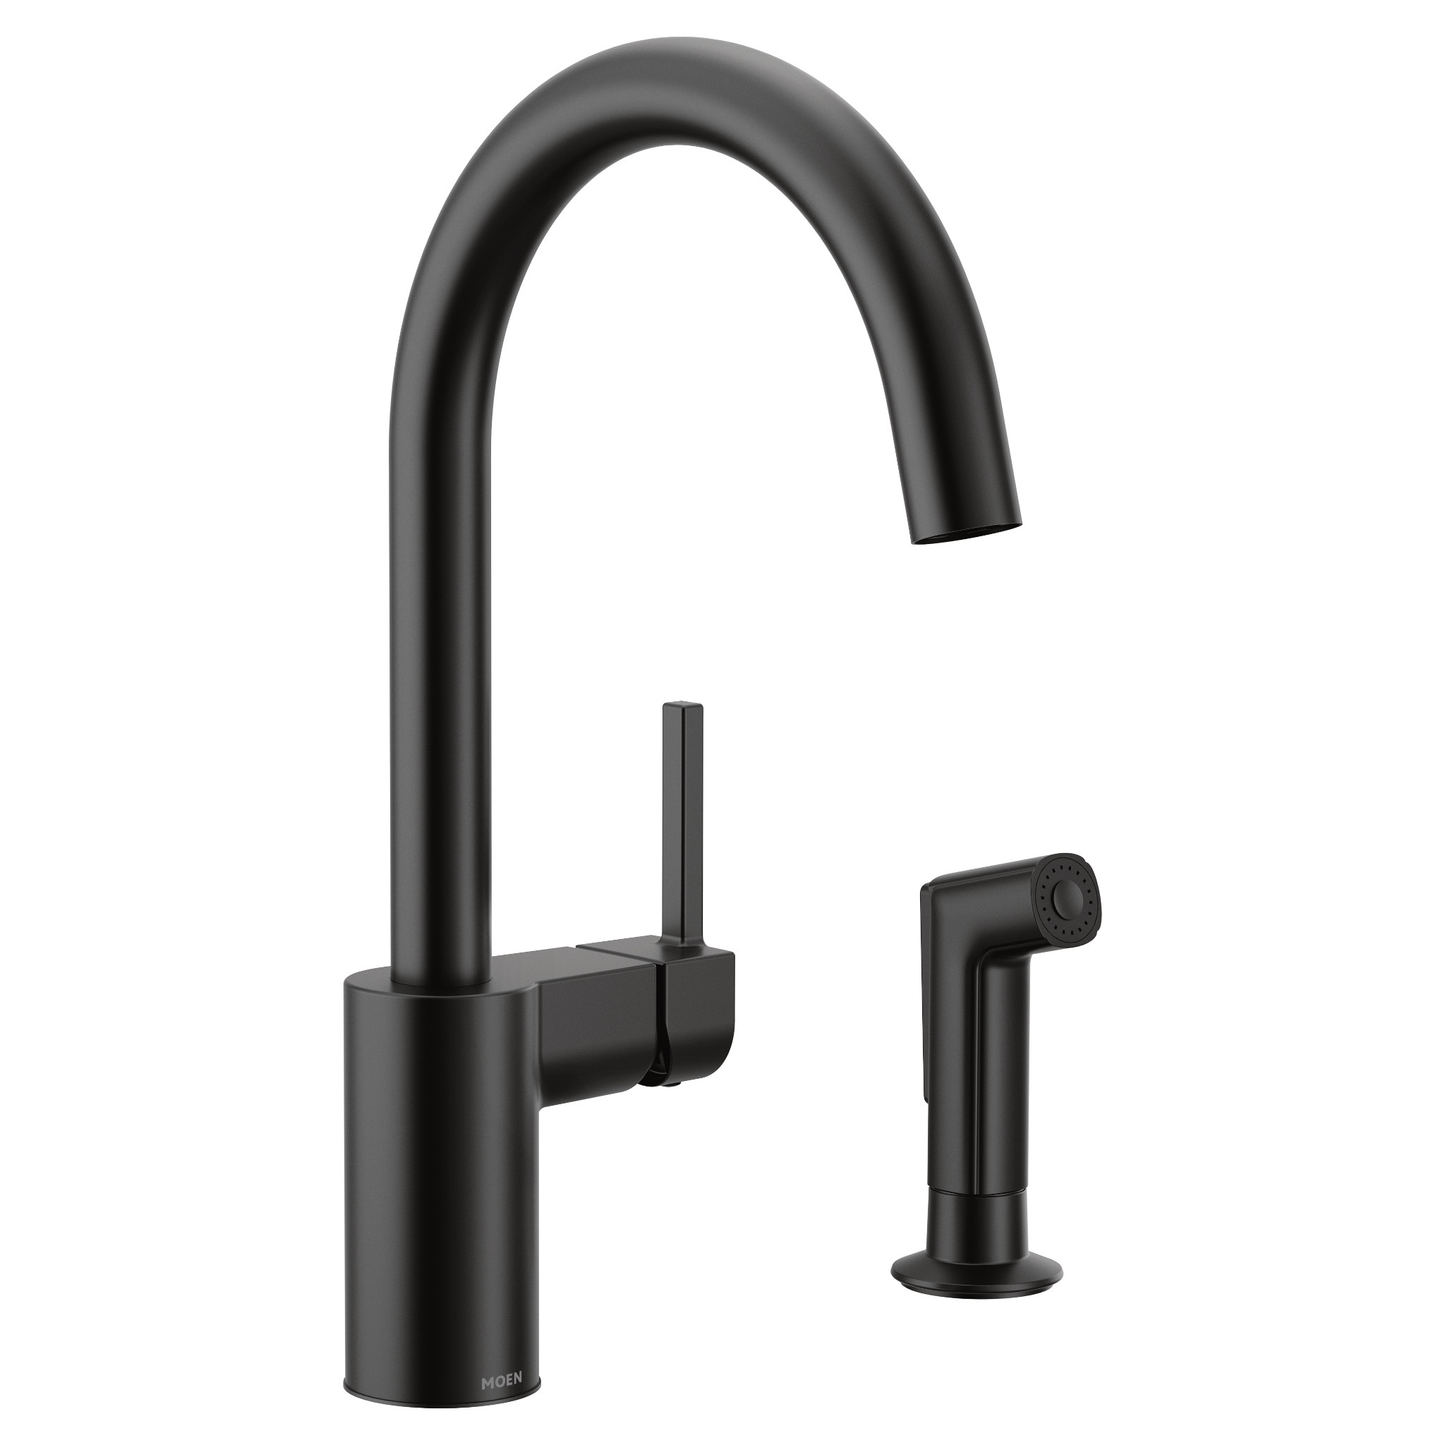 Align One-Handle High Arc Kitchen Faucet